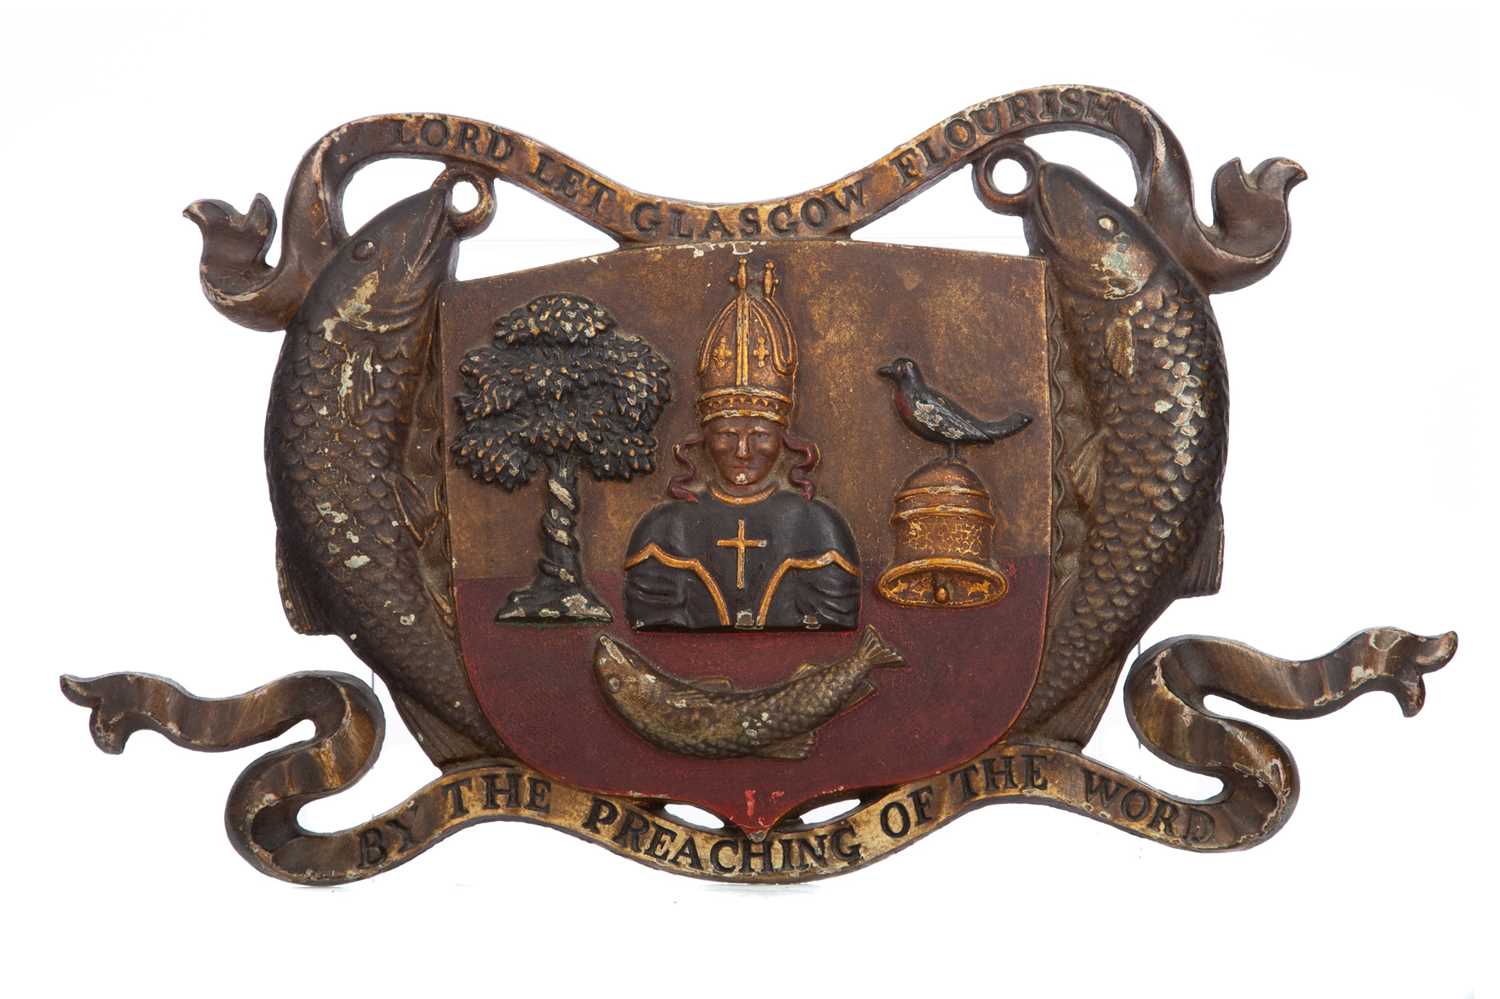 Lot 767 - A LATE 19TH / EARLY 20TH CENTURY CAST IRON CITY OF GLASGOW COAT OF ARMS